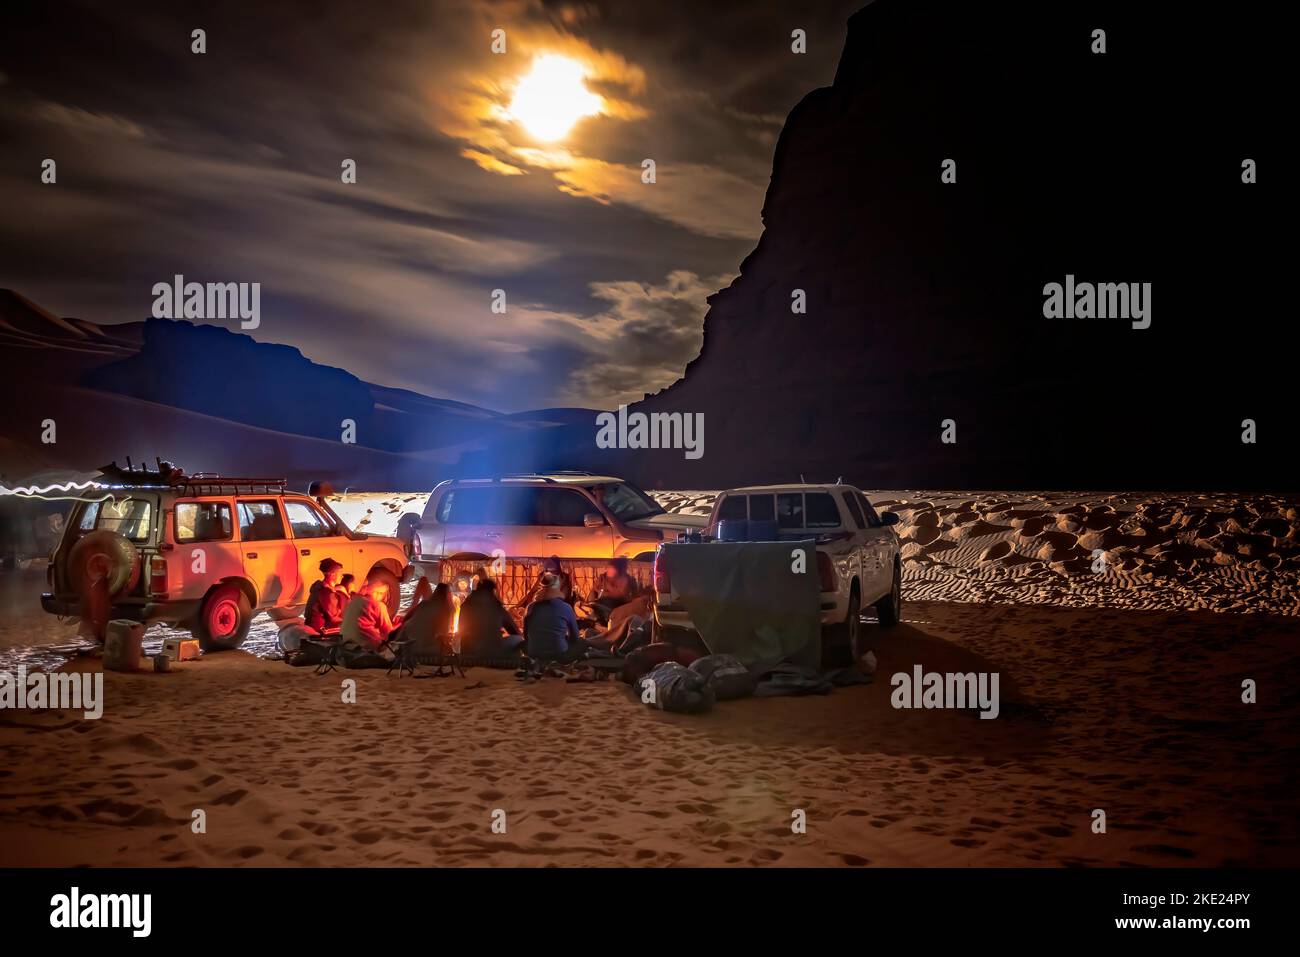 Camping group in Sahara Desert by night. 4X4 vehicules parked, tourists and local berber people sitting around a campfire. cloudy sky moonlight. Stock Photo